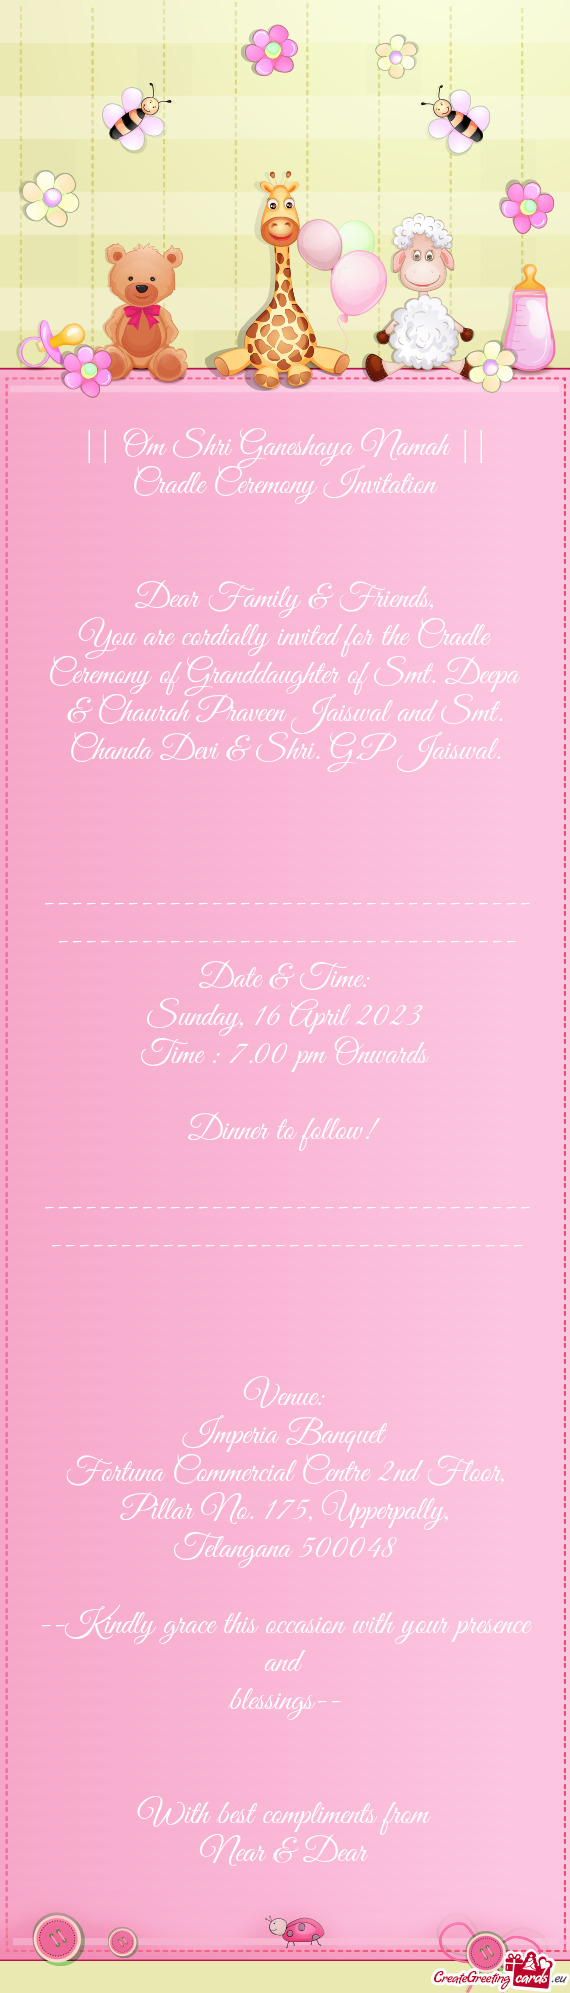 You are cordially invited for the Cradle Ceremony of Granddaughter of Smt. Deepa & Chaurah Praveen J